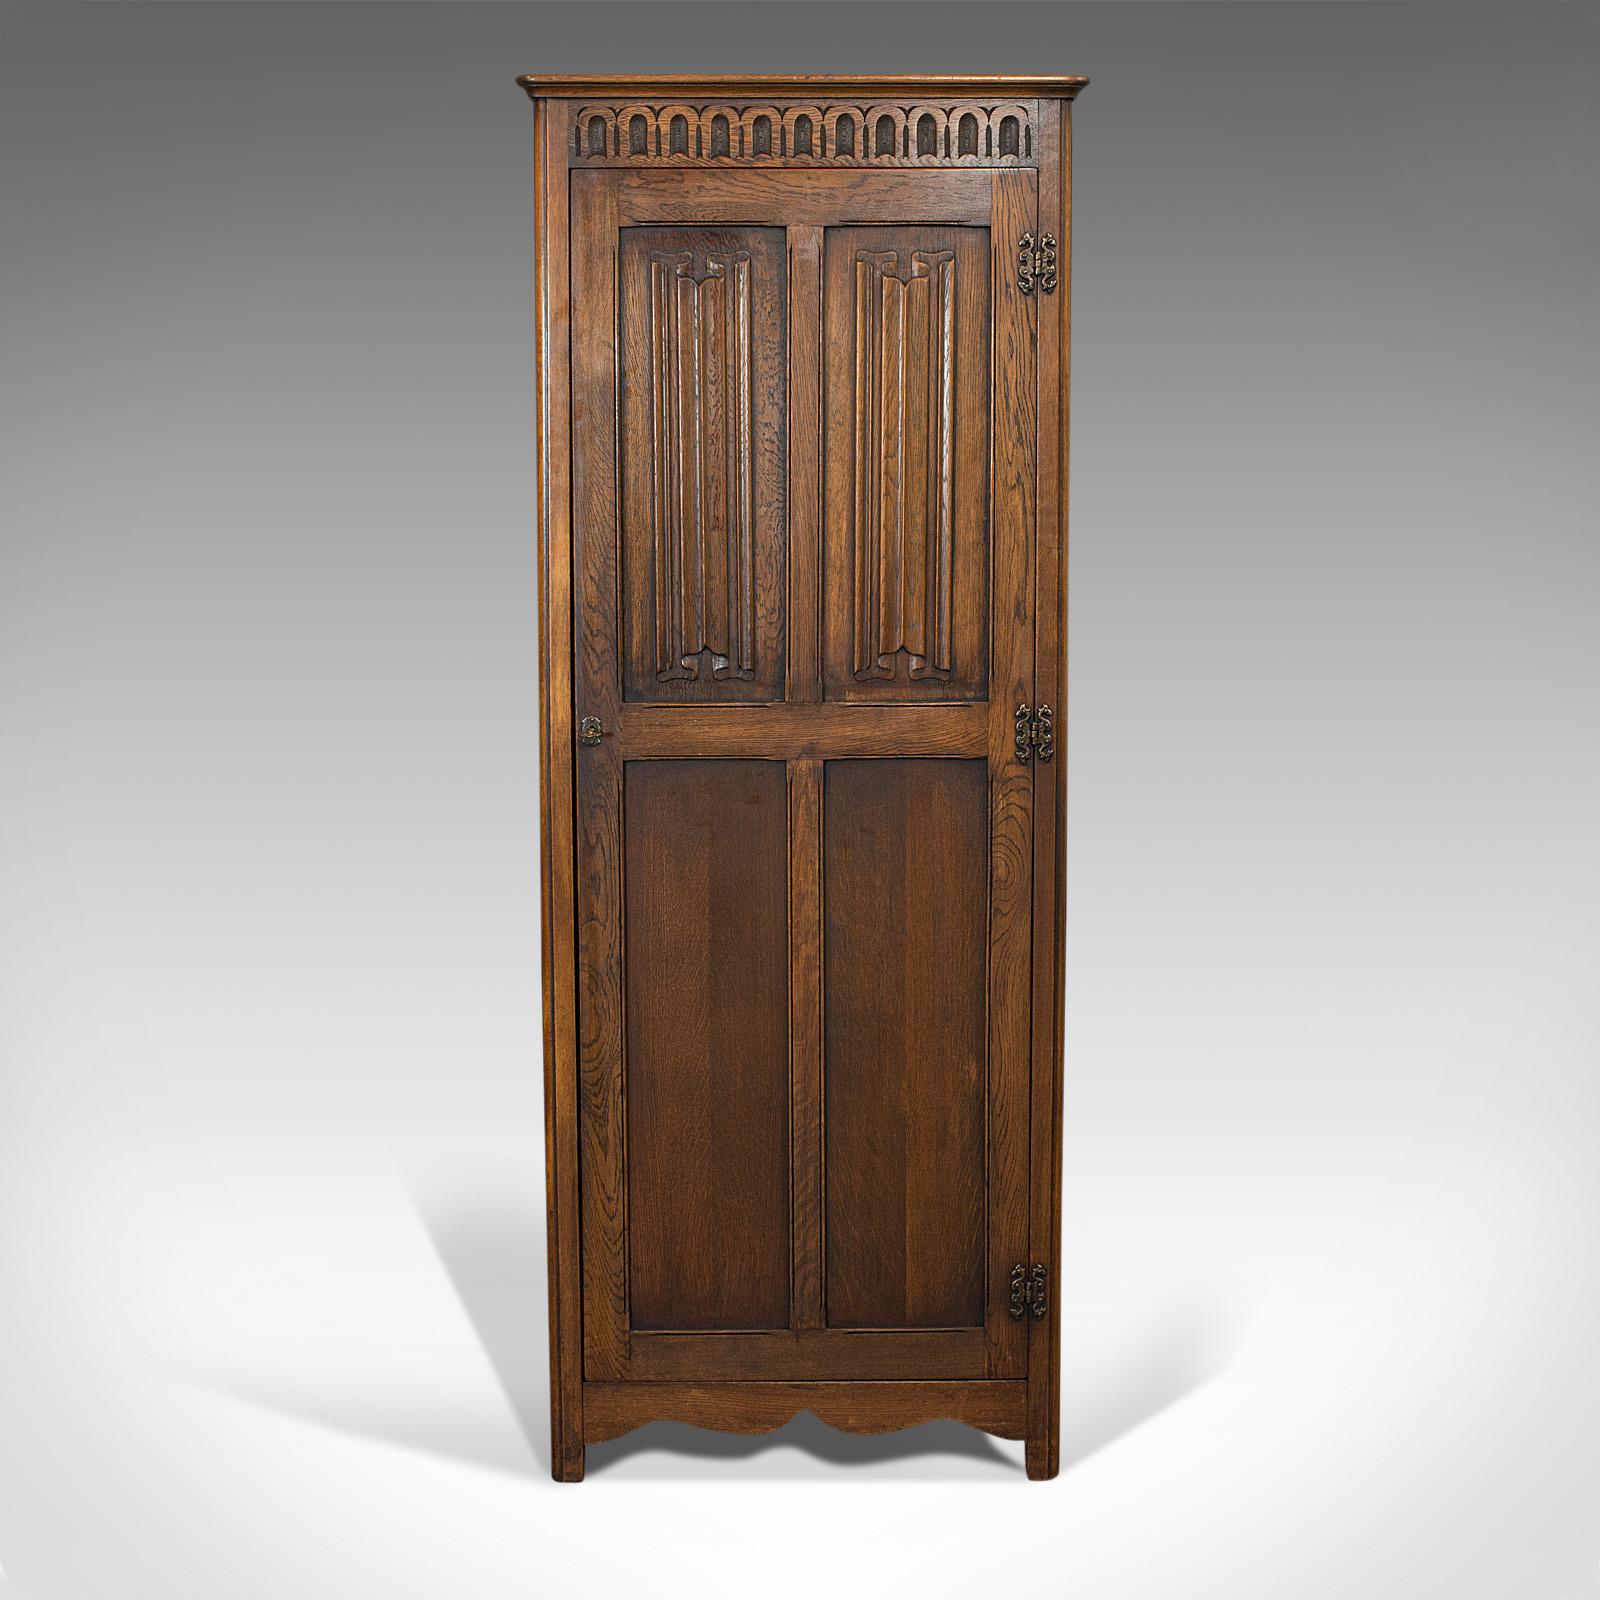 This is a vintage Ipswich wardrobe. An English, oak four panel cupboard from the Art Deco period, circa 1930.

Wonderfully carved example
Displays a desirable aged patina
Select oak shows fine grain interest
Deep caramel hues to the wax polish